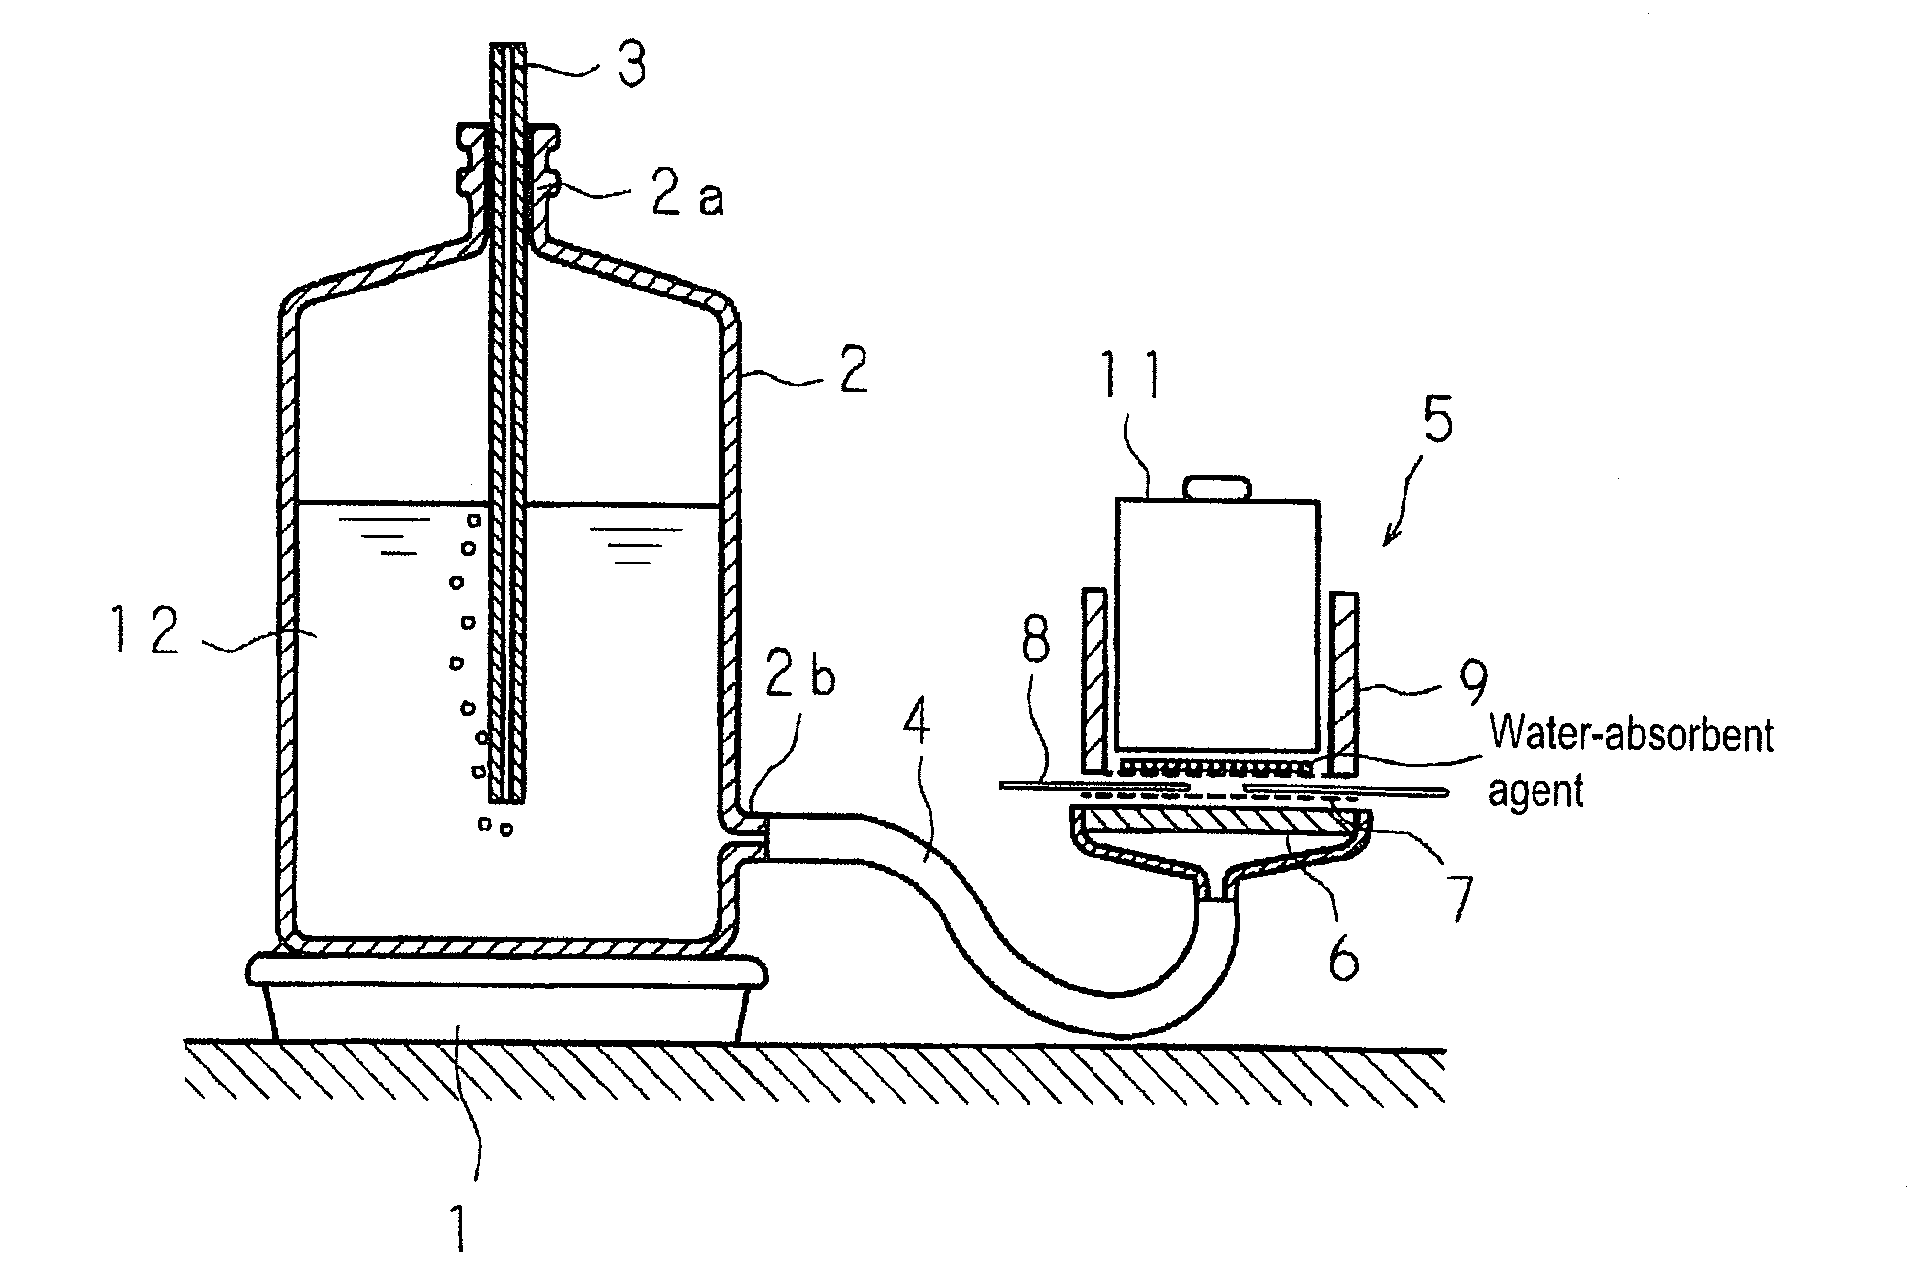 Particular water-absorbent agent having water-absorbent resin as main component